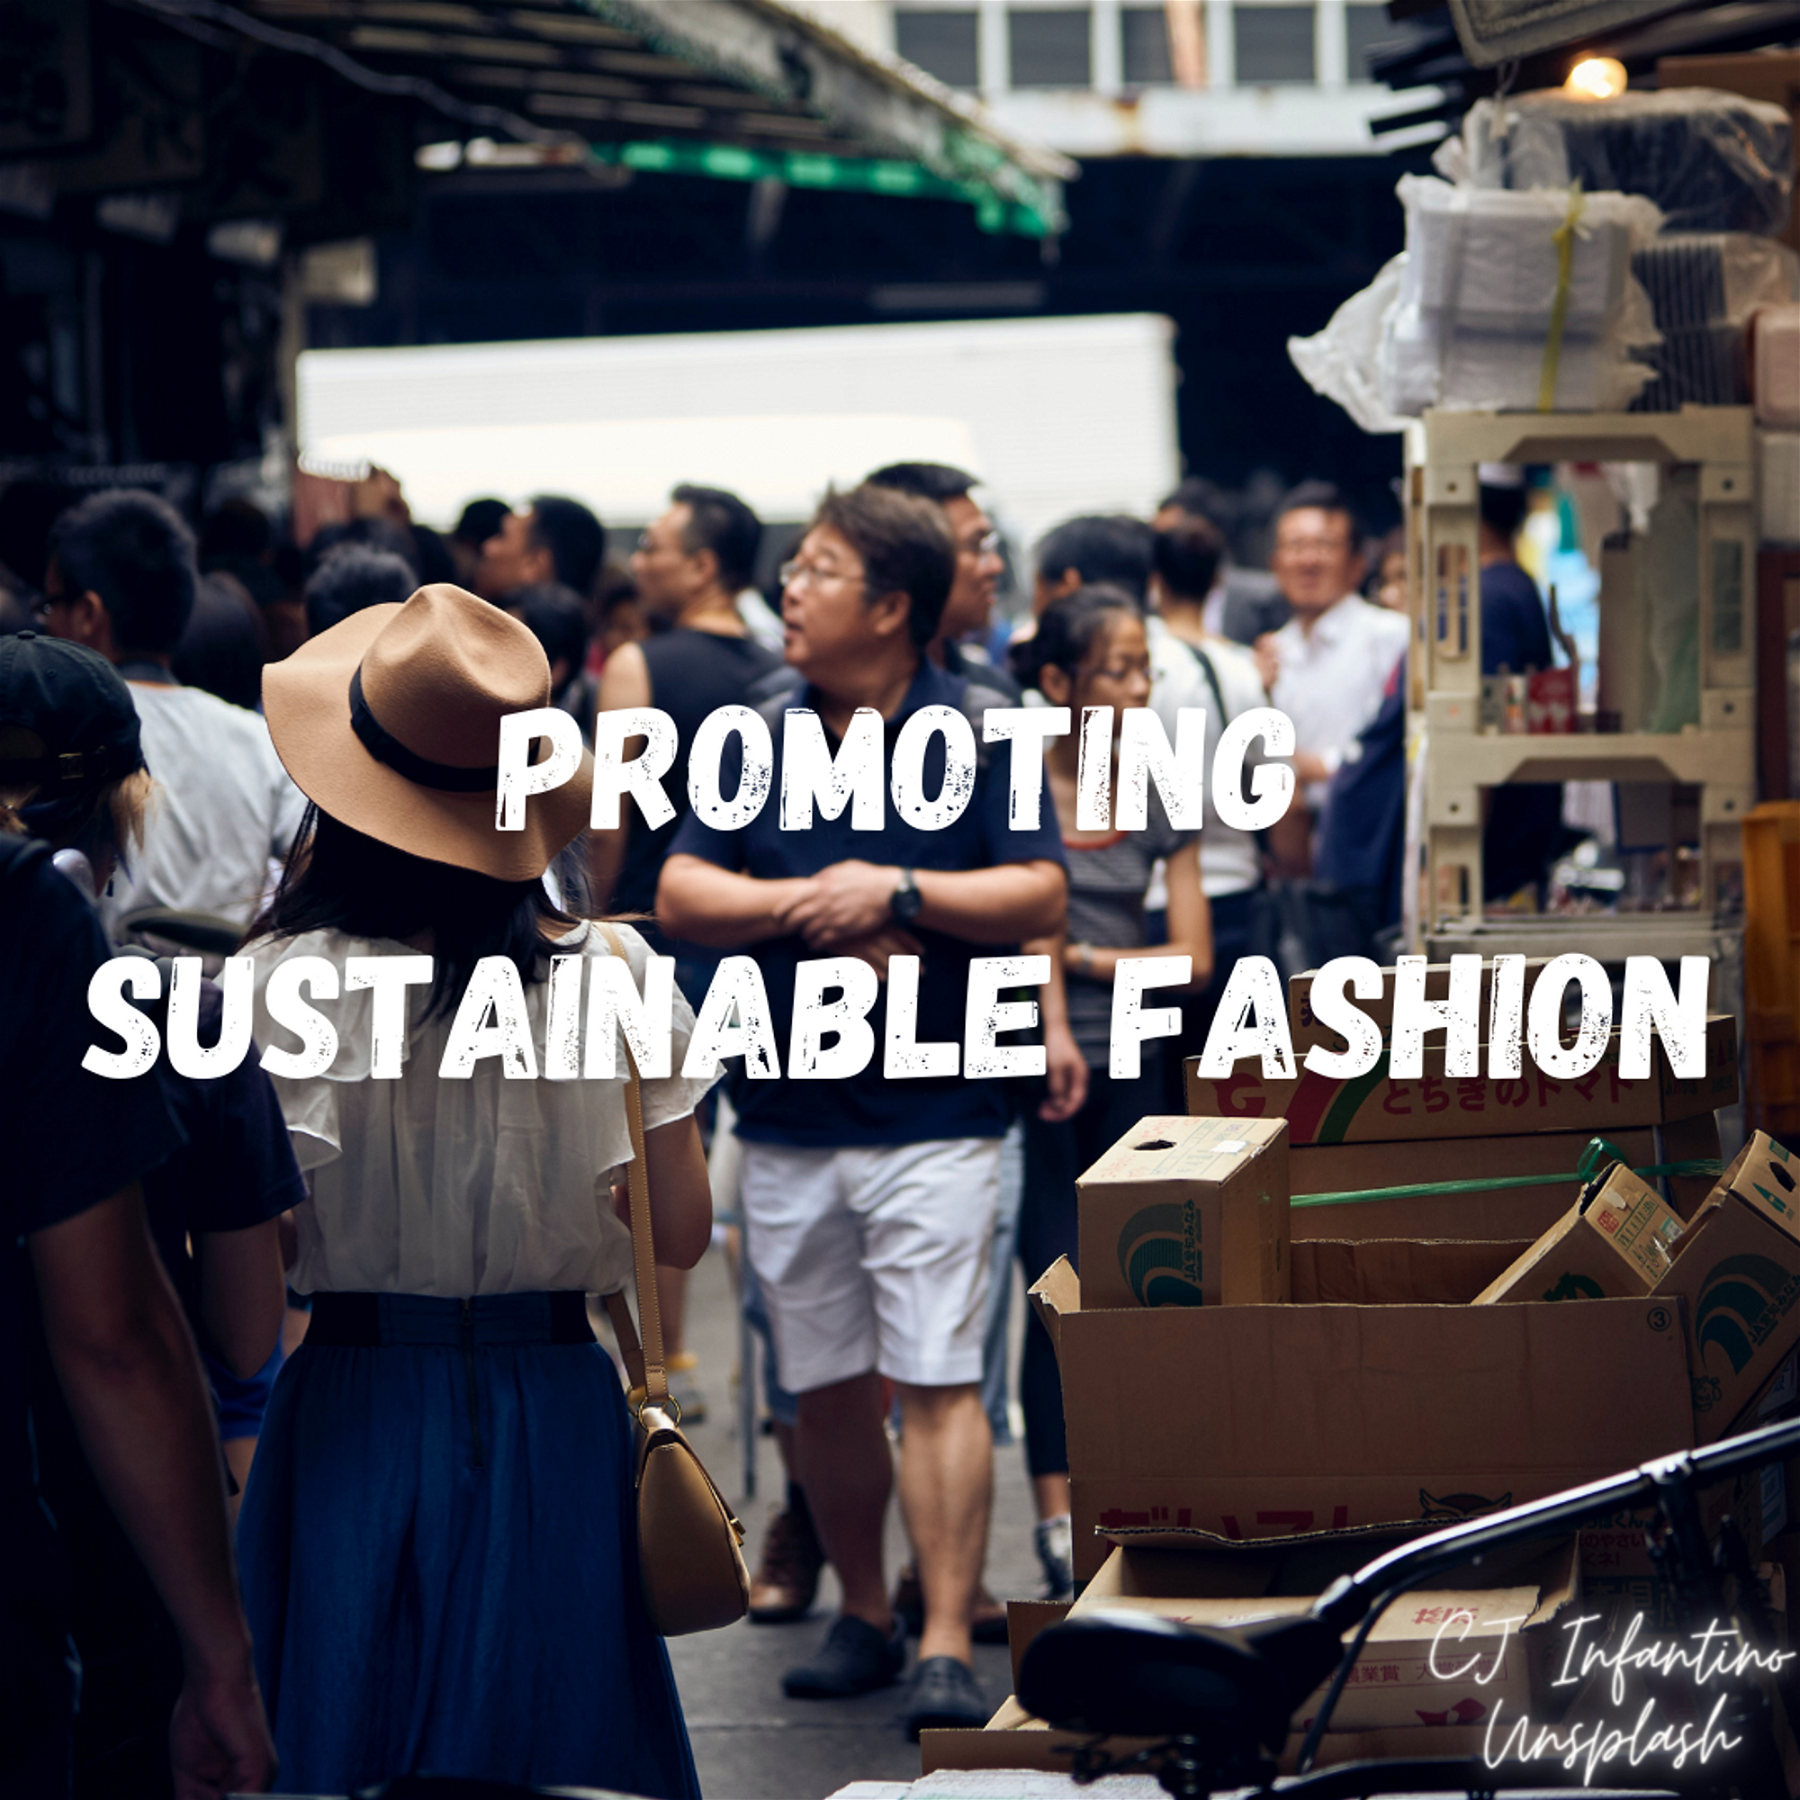 Empowering Change: The Crucial Role of Consumers in Promoting Sustainable Fashion